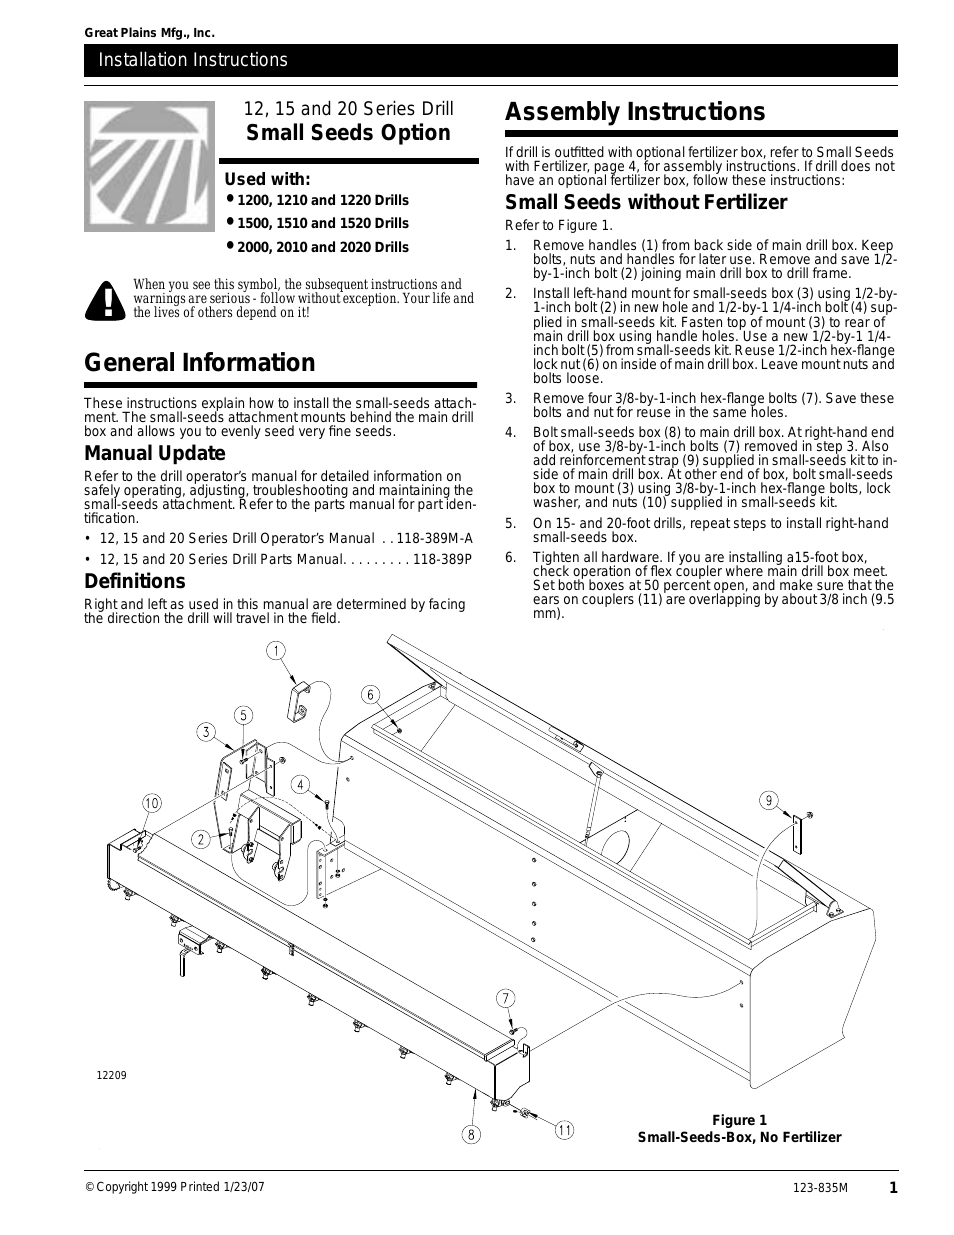 20 Series Drill Assembly Instructions